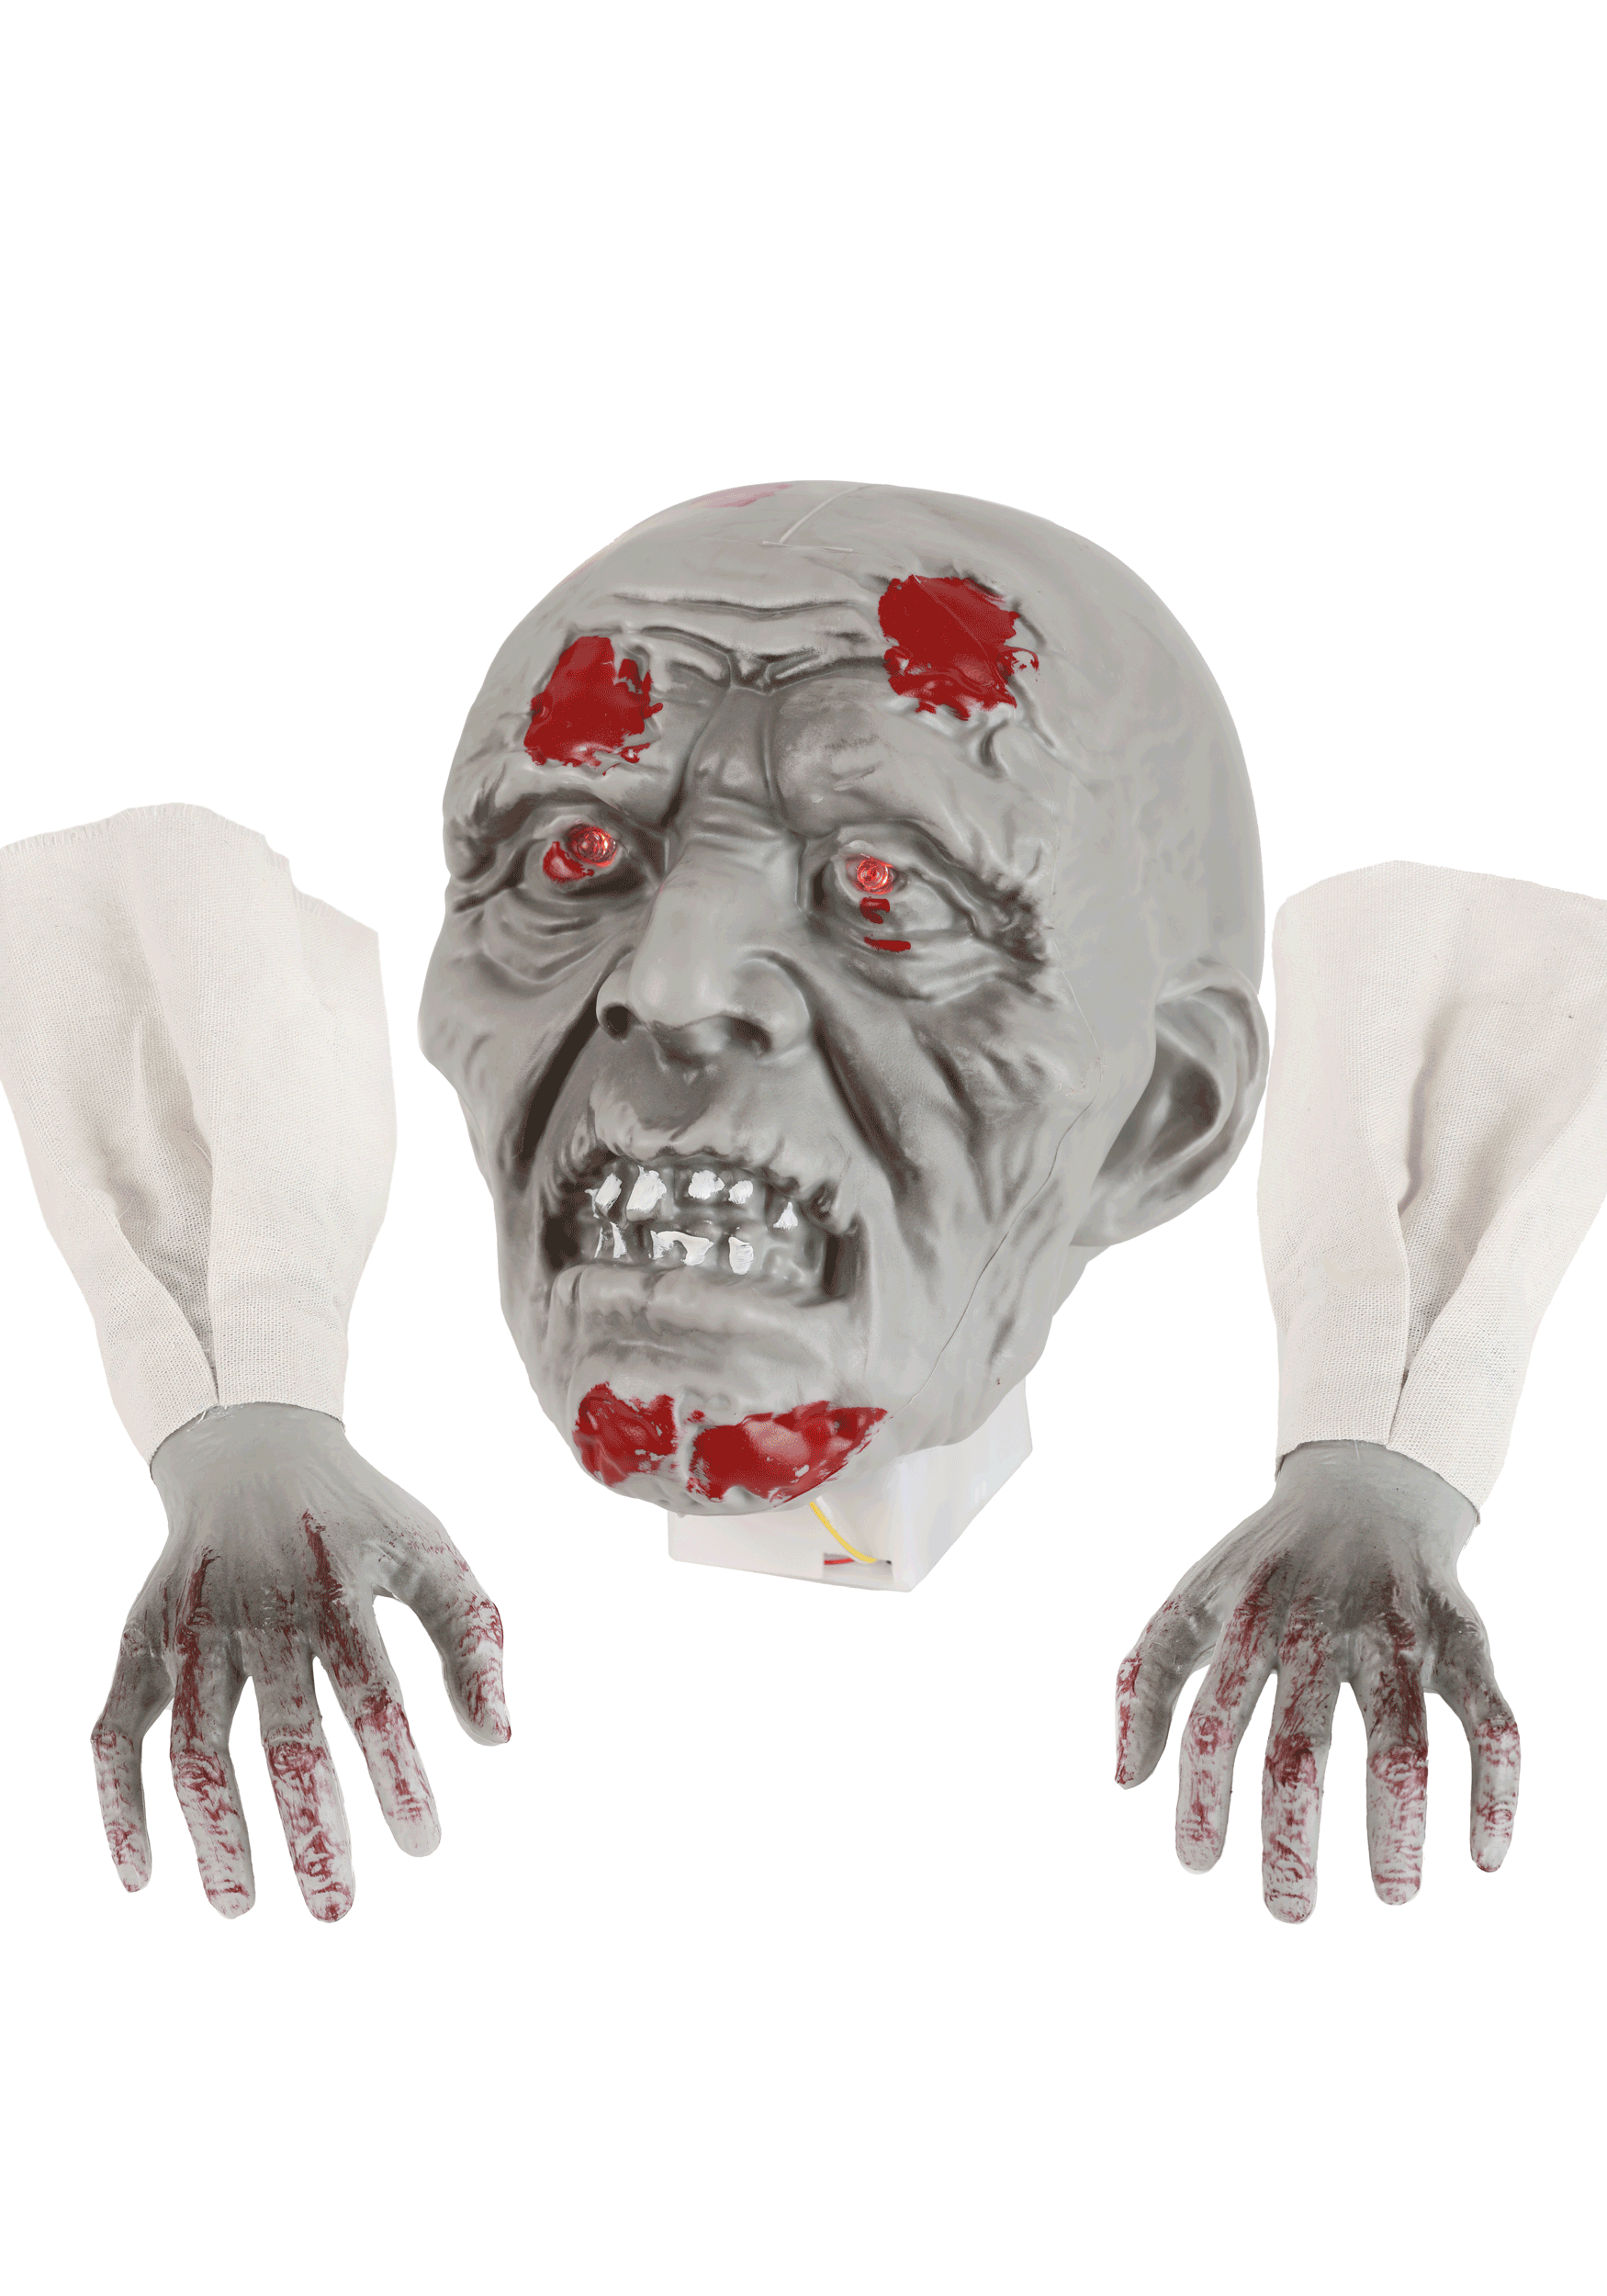 Skeleton Head And Hands With Lights Prop